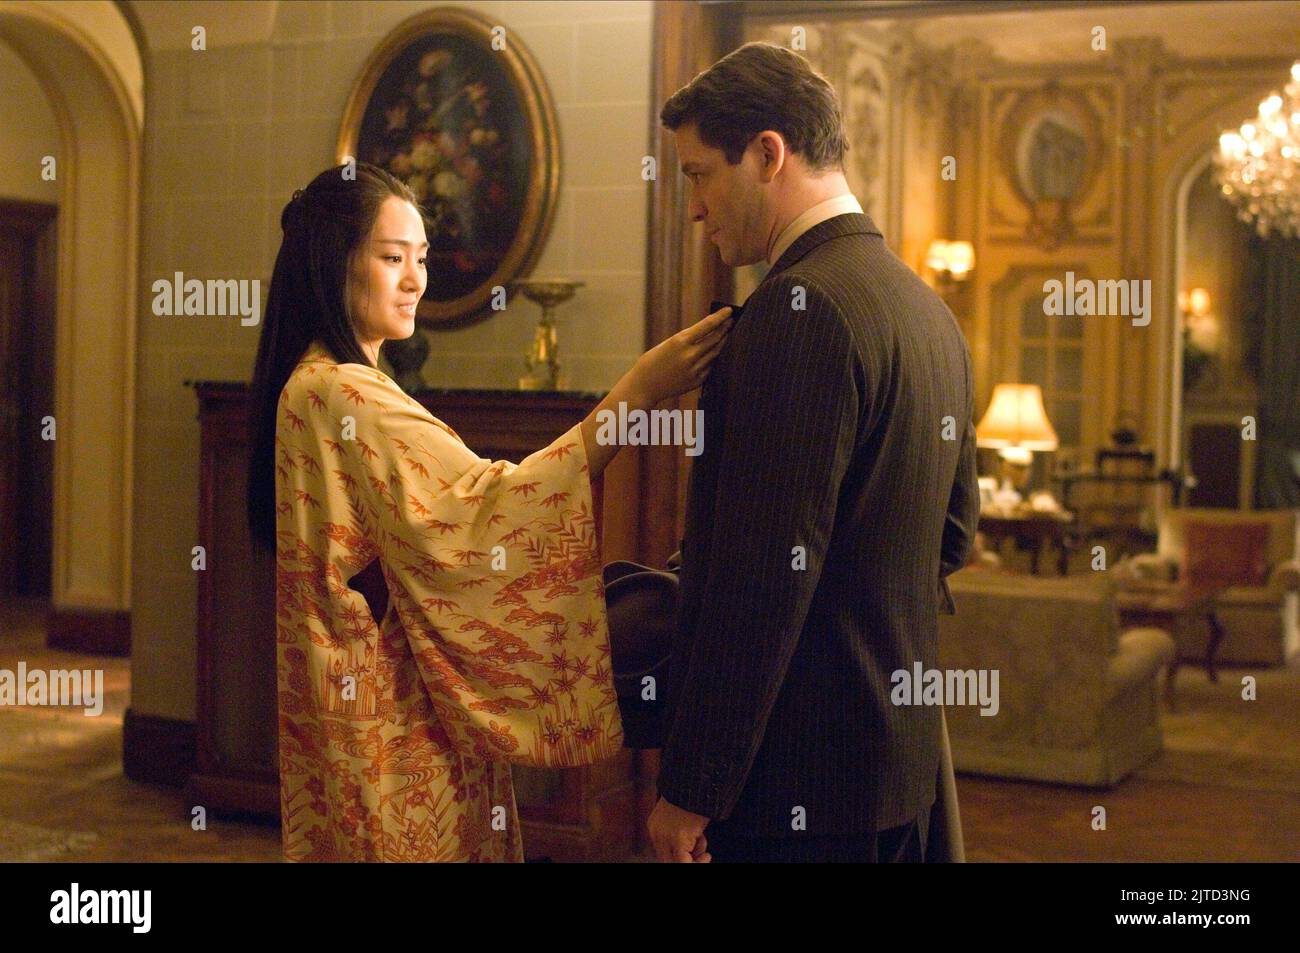 GONG, WEST, HANNIBAL RISING, 2007 Stockfoto